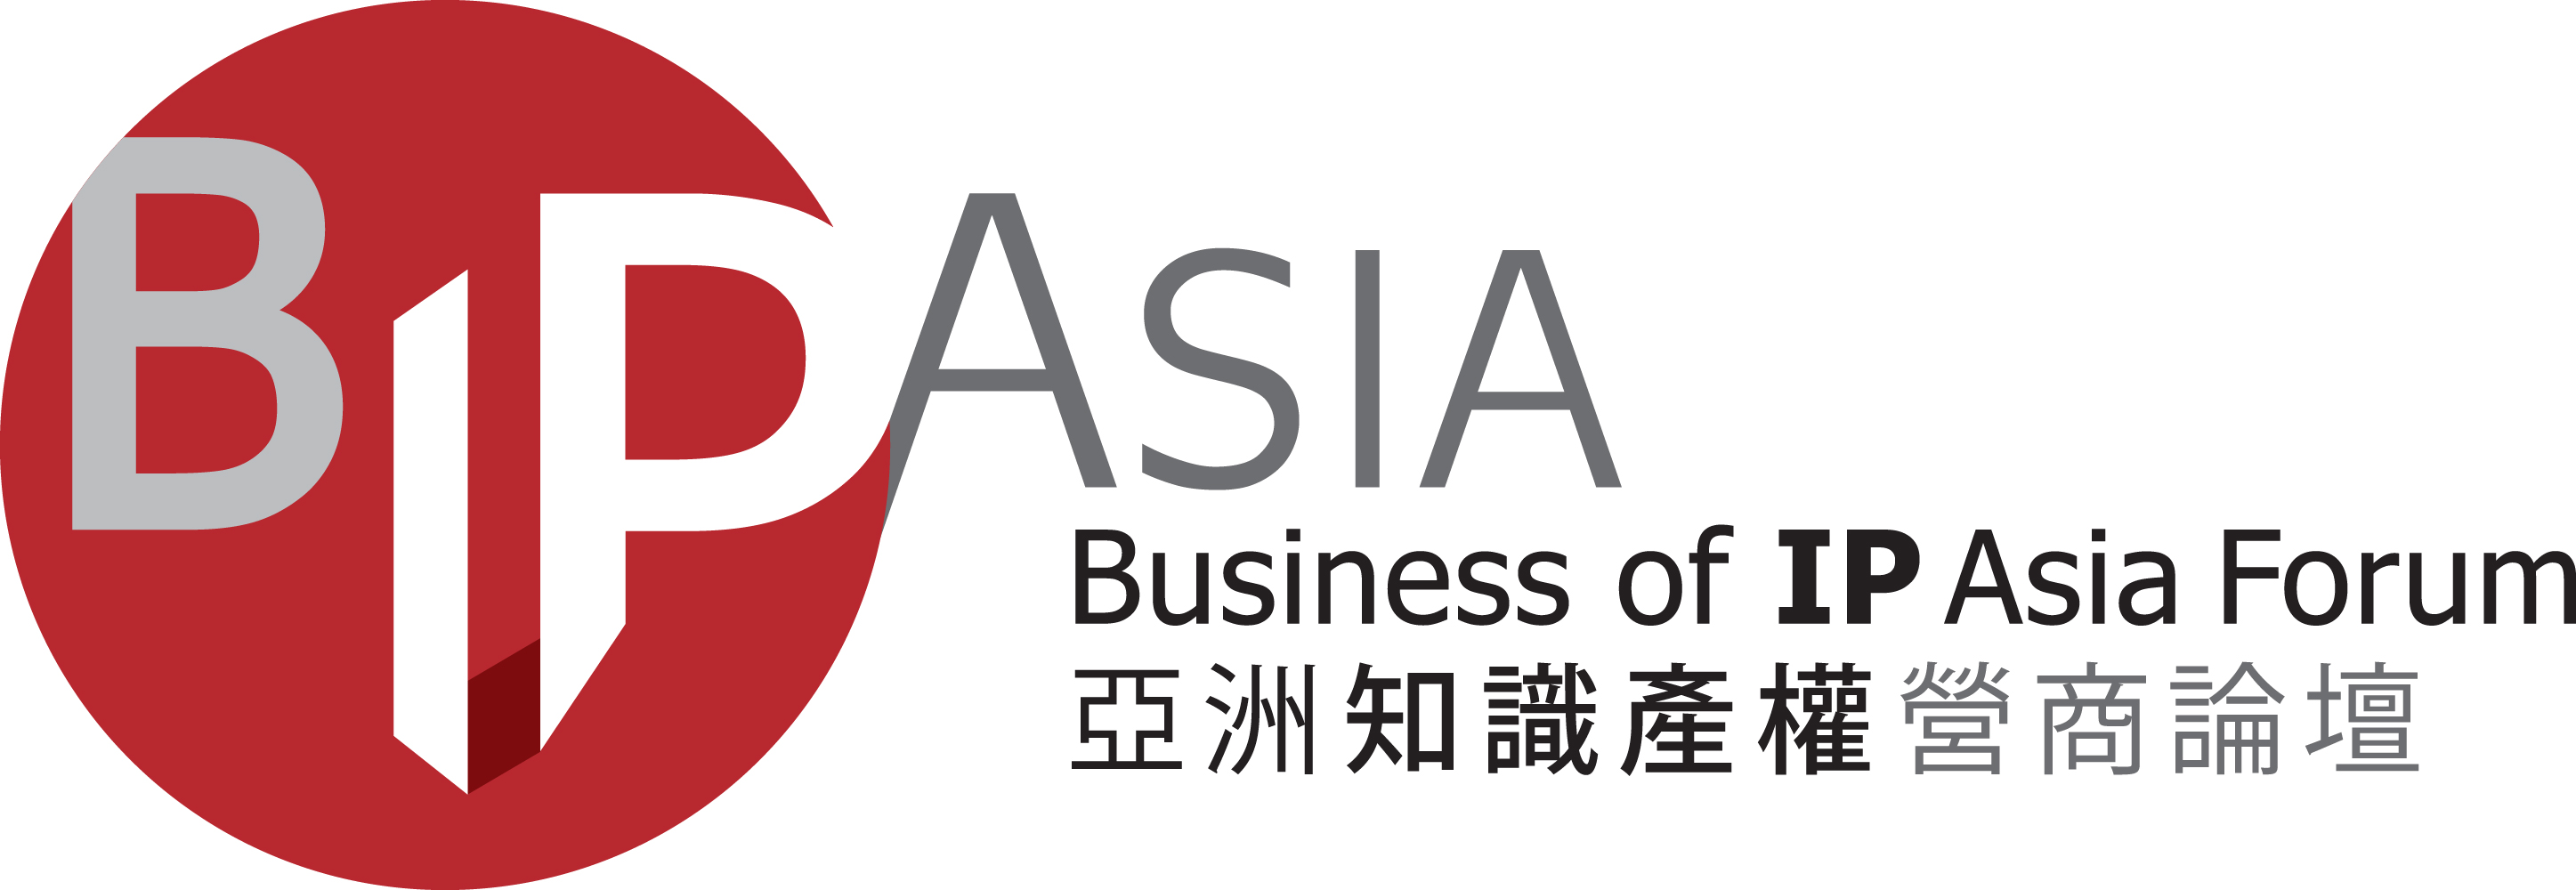 Business of IP Asia Forum Promo Banner